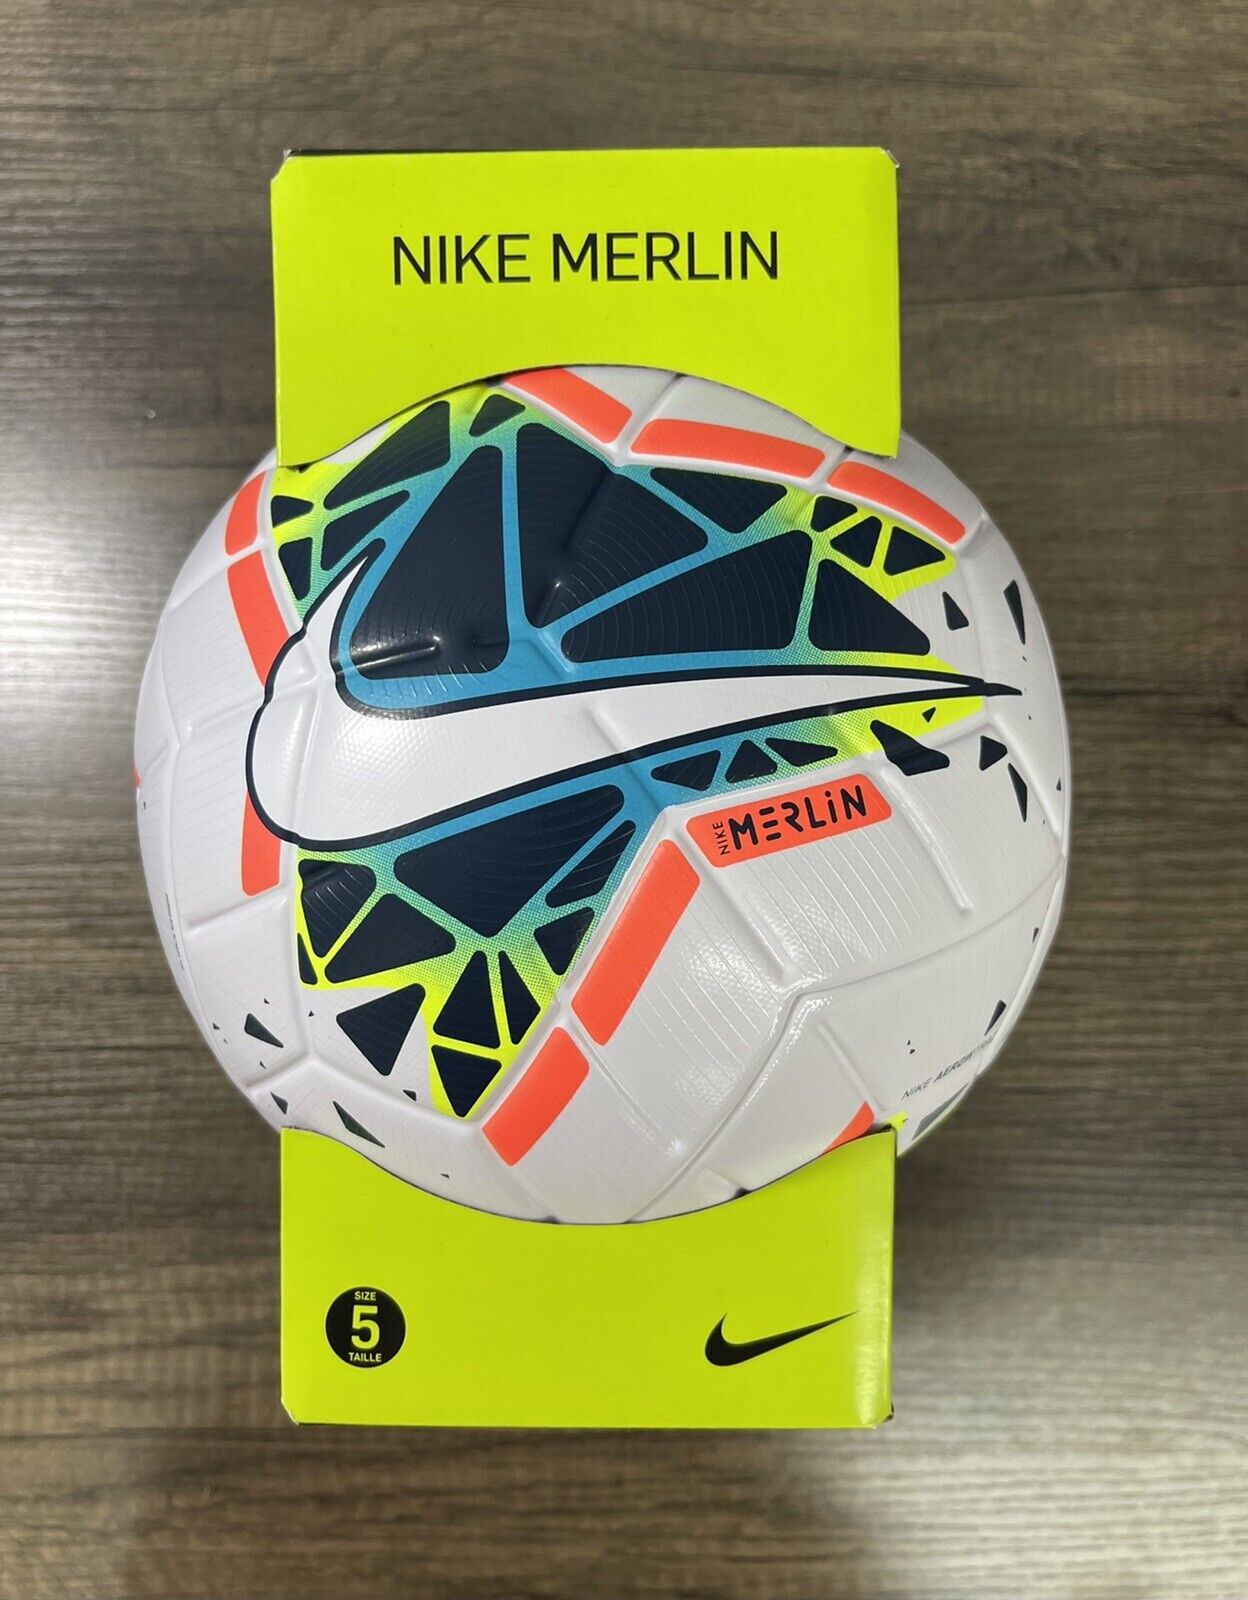 Nike Merlin Official Match Soccer Football Ball ACC White SC3635-100 Size 5